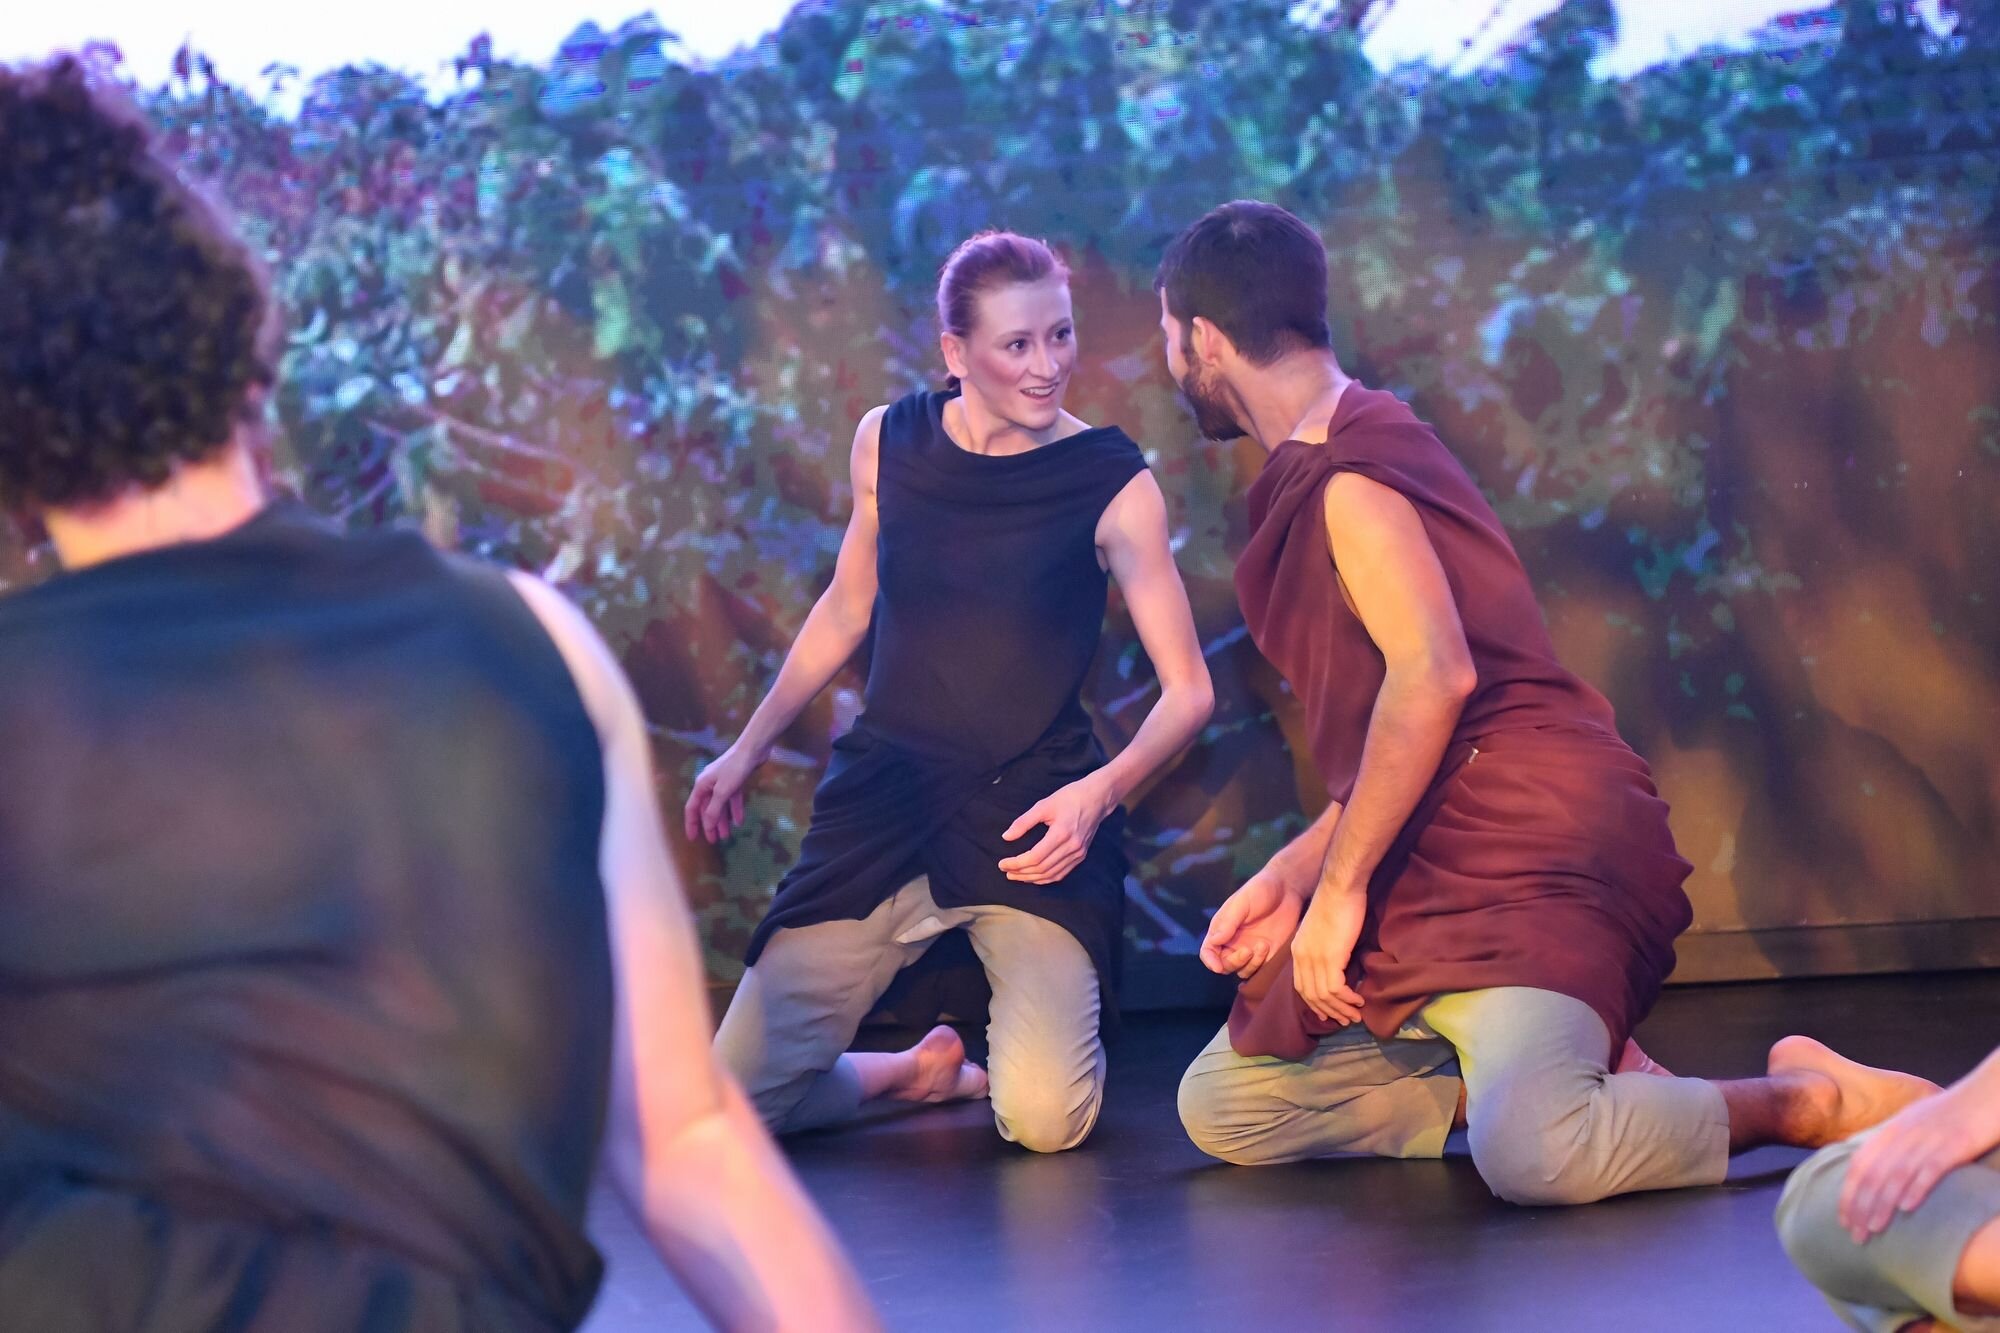  A male dancer and a female dancer wearing tunics kneel on the ground, engaging playfully with each other as others look on. 